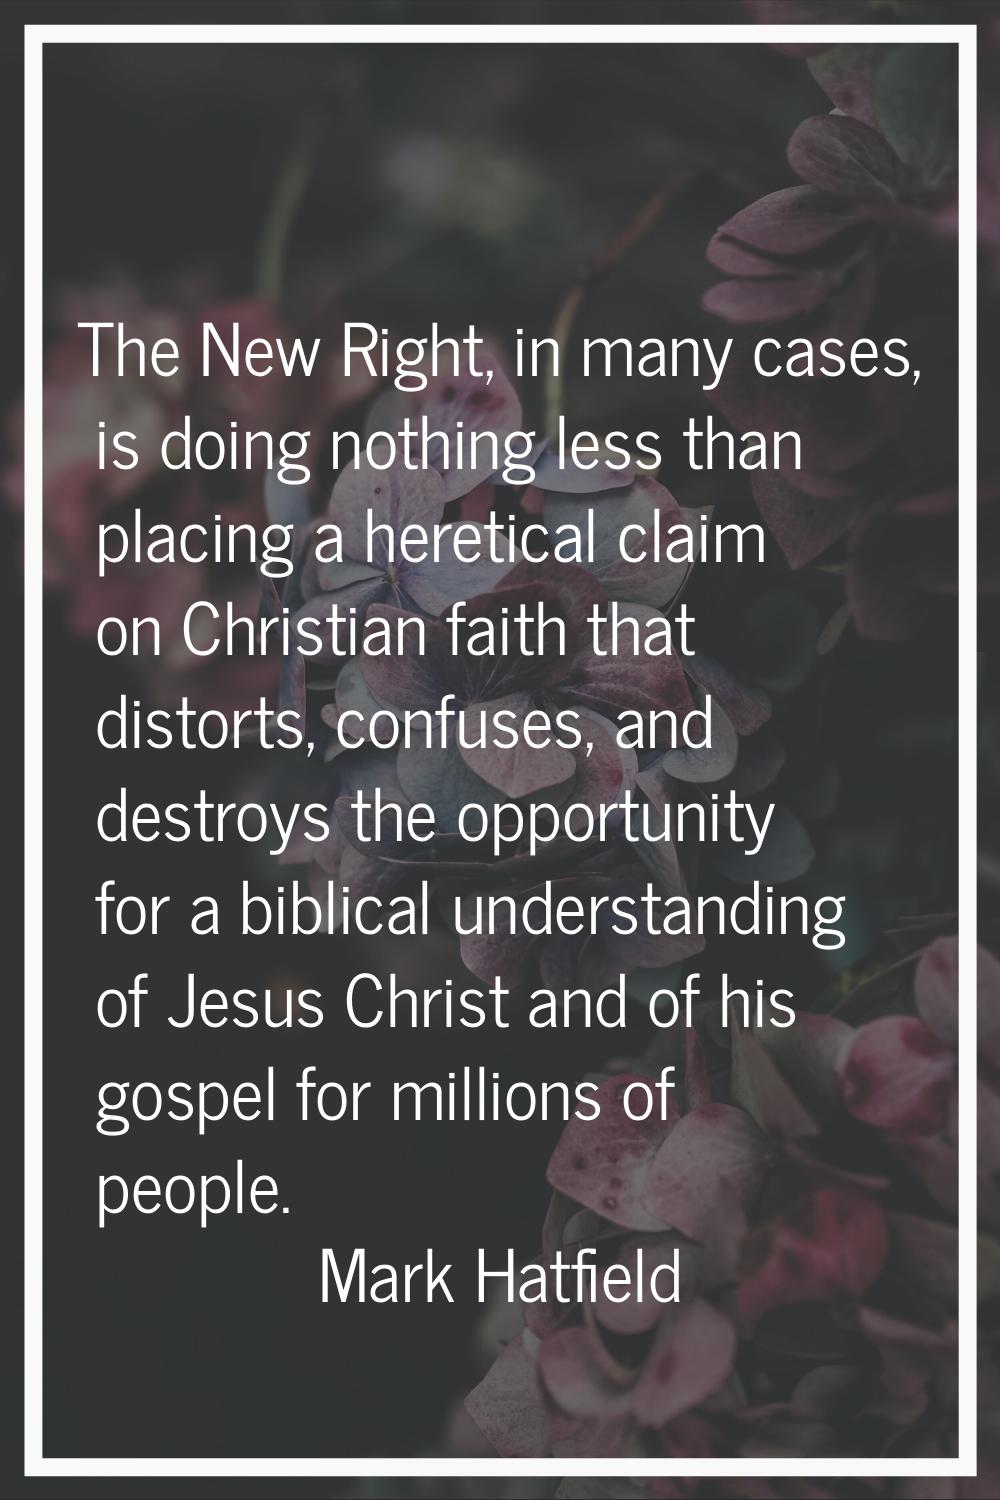 The New Right, in many cases, is doing nothing less than placing a heretical claim on Christian fai